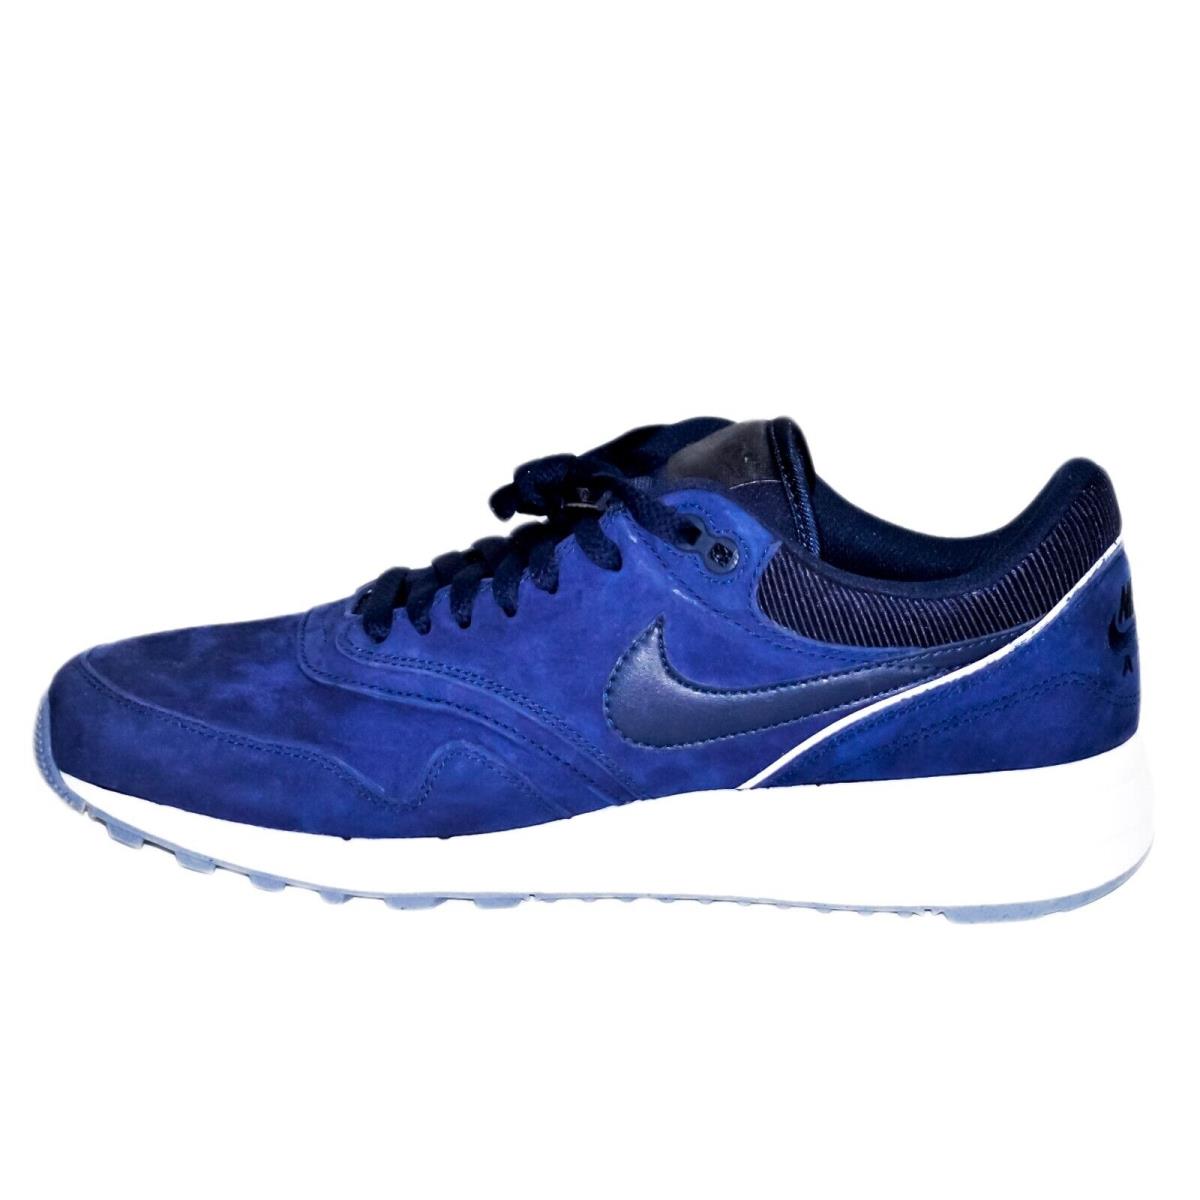 Nike shoes Air Odyssey - Obsidian White, Blue, Gray 1